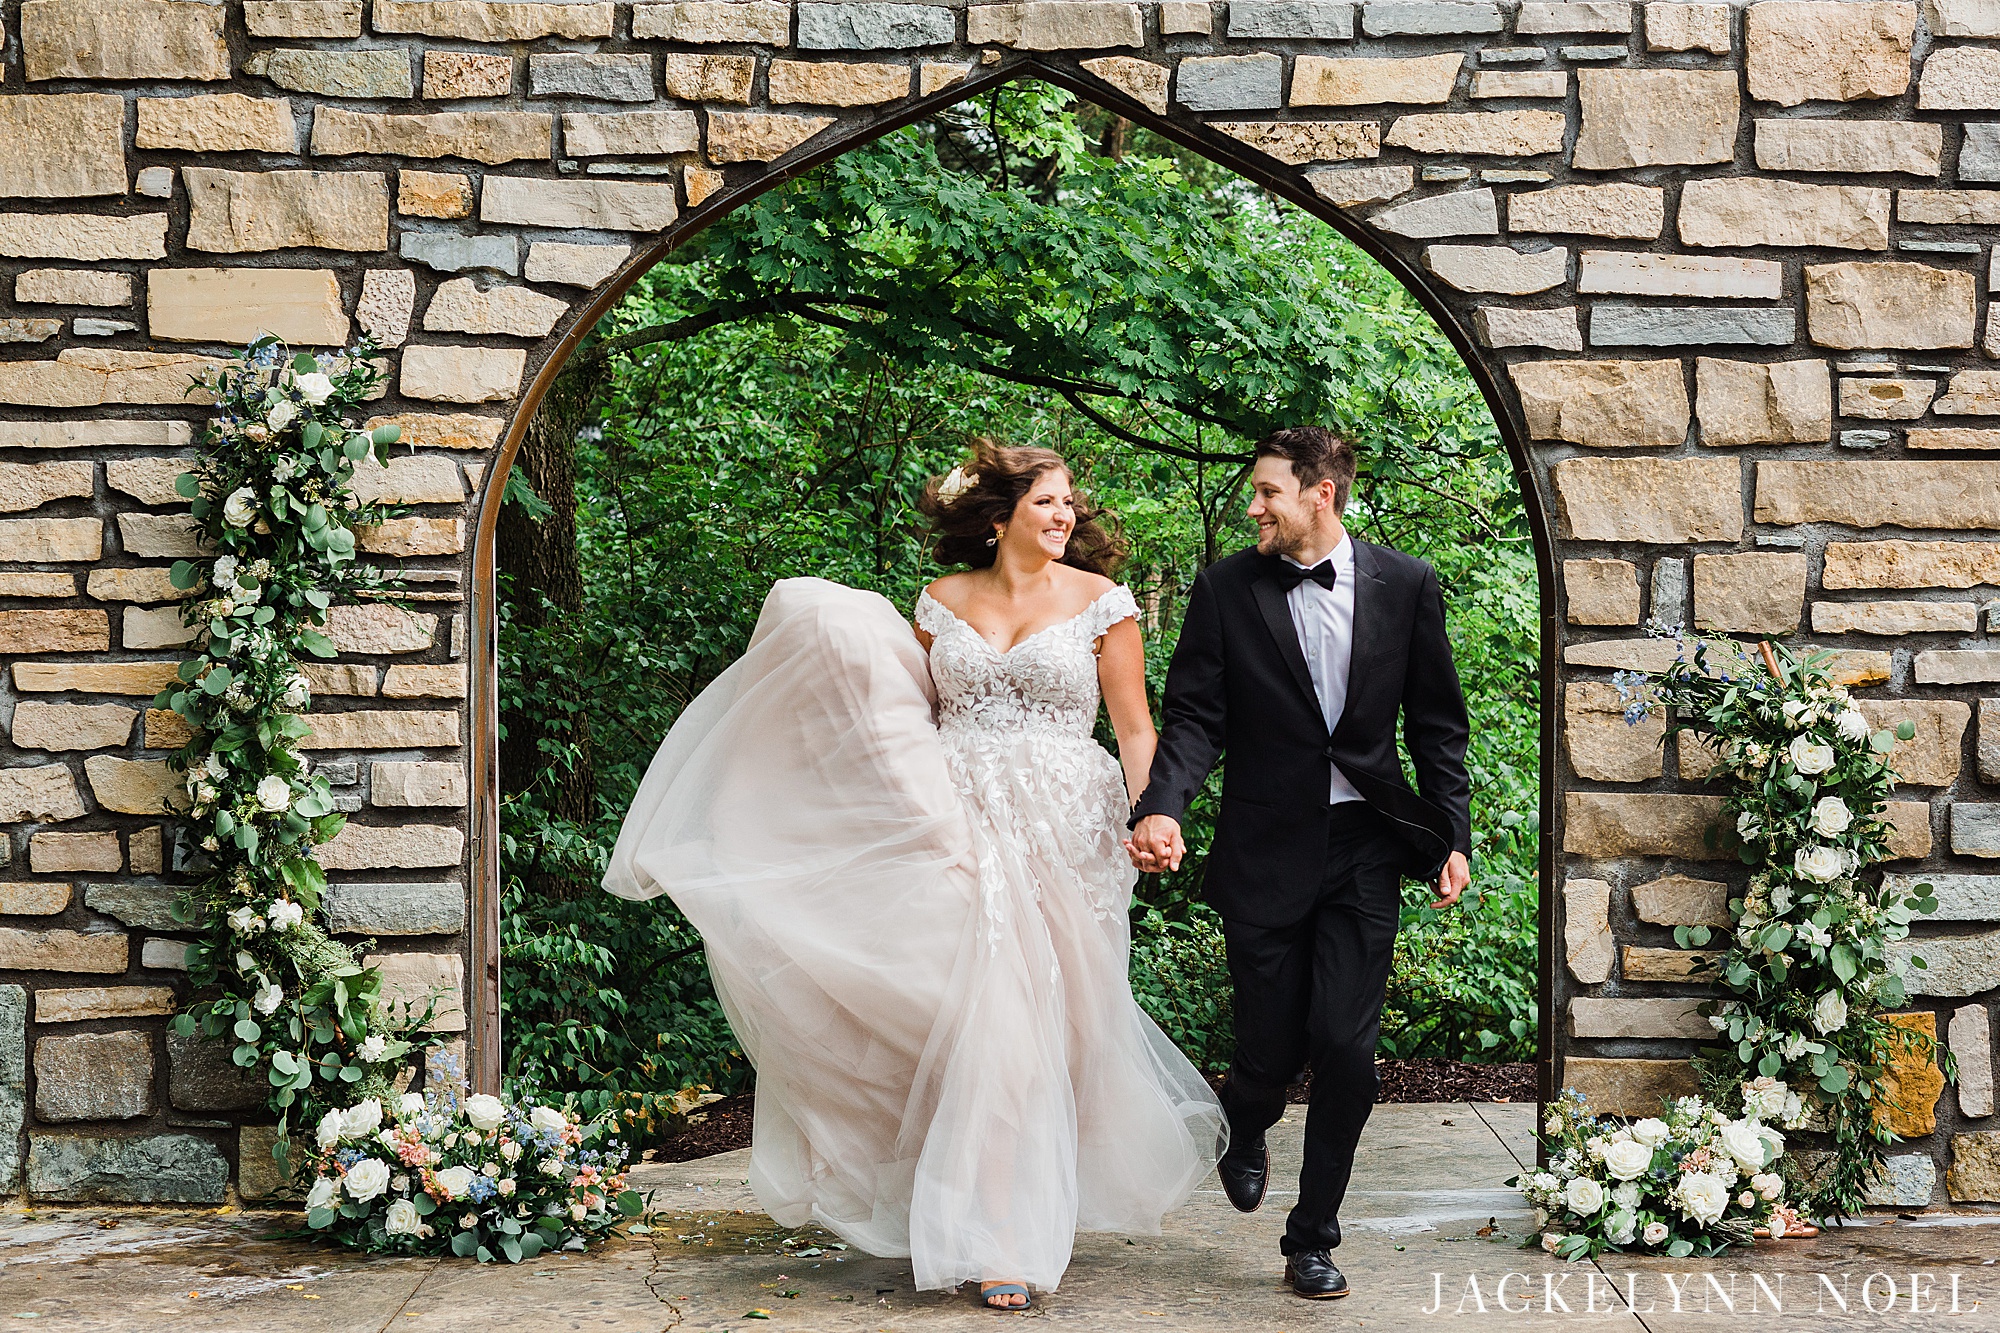 Bride and groom running through stone arch. Bride is wearing an off the shoulder dress and groom is in a classic black tuxedo.